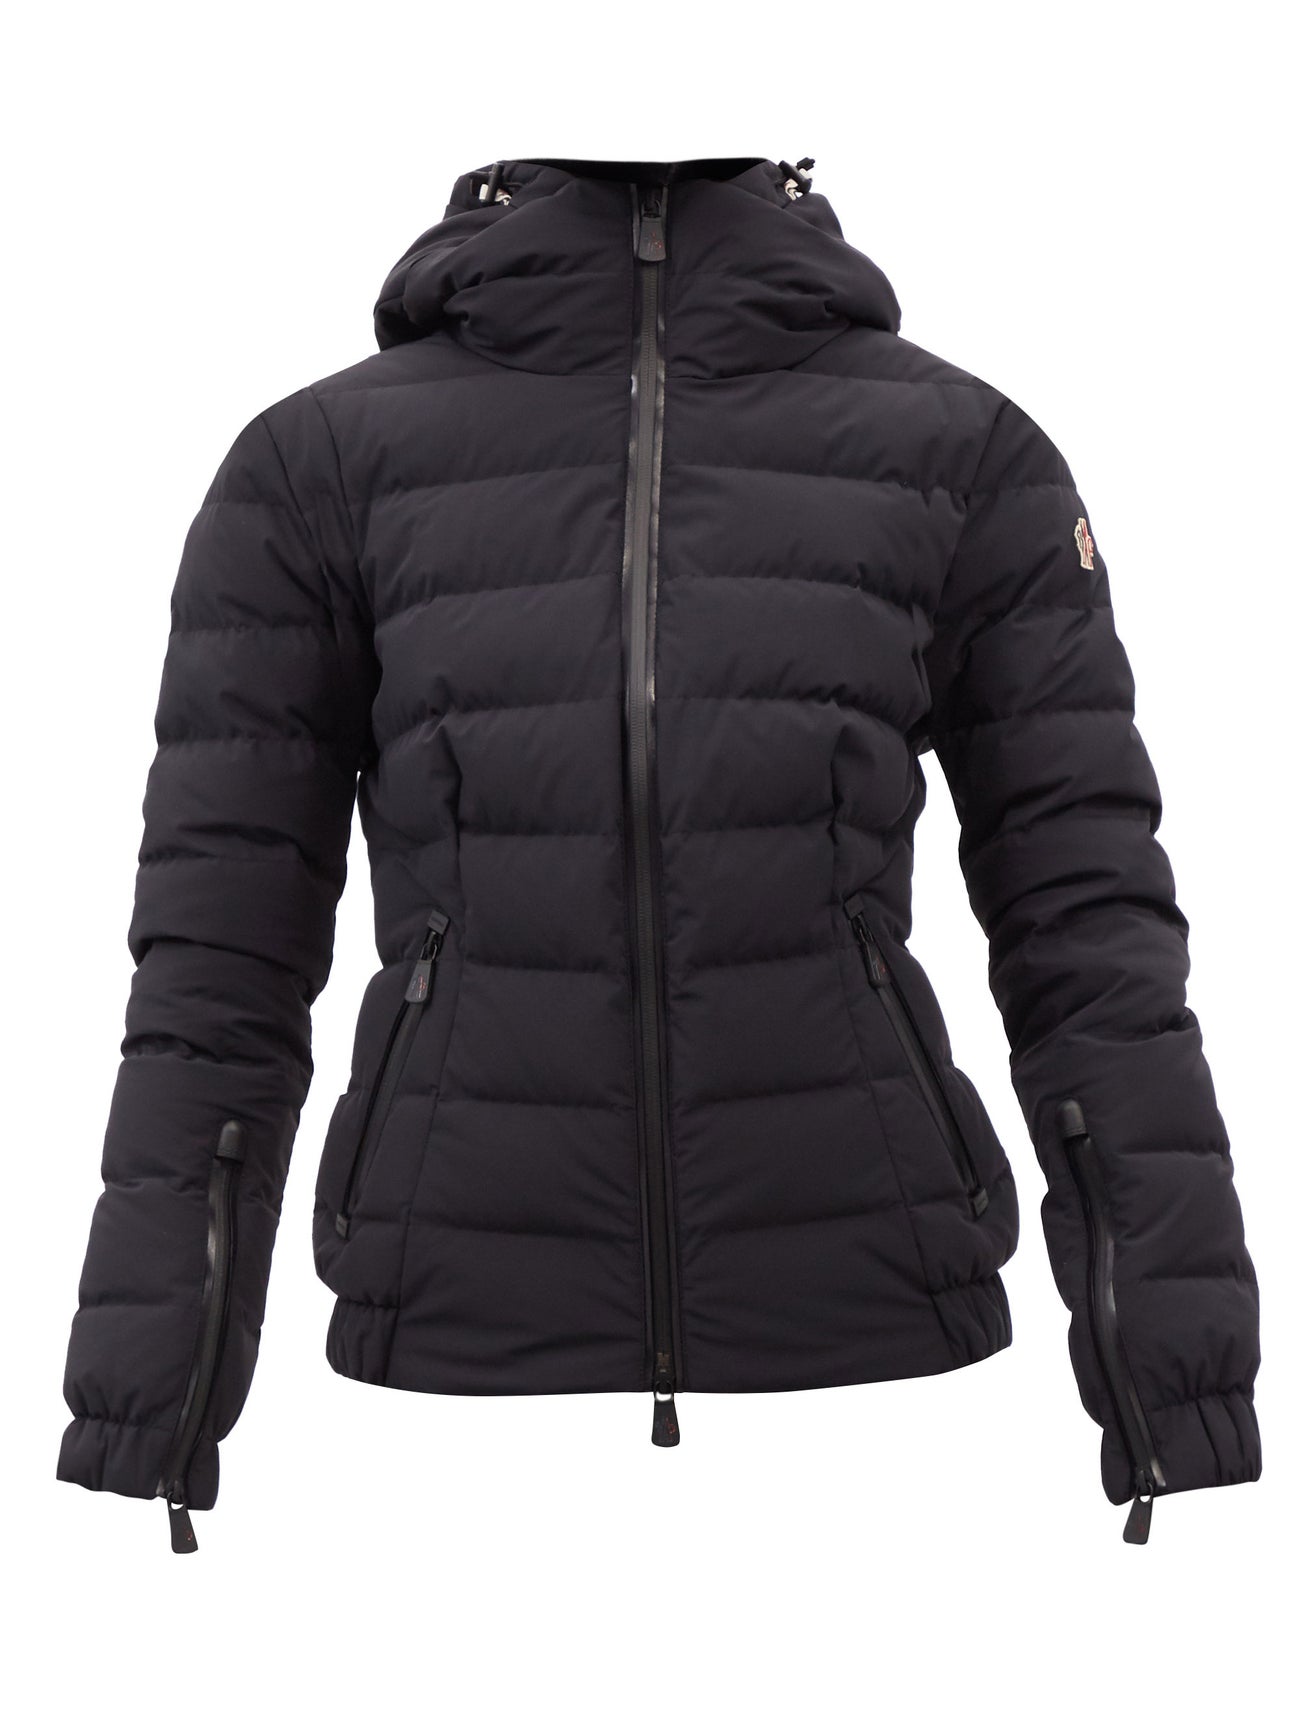 MONCLER GRENOBLE Chena quilted down hooded ski jacket £1,185